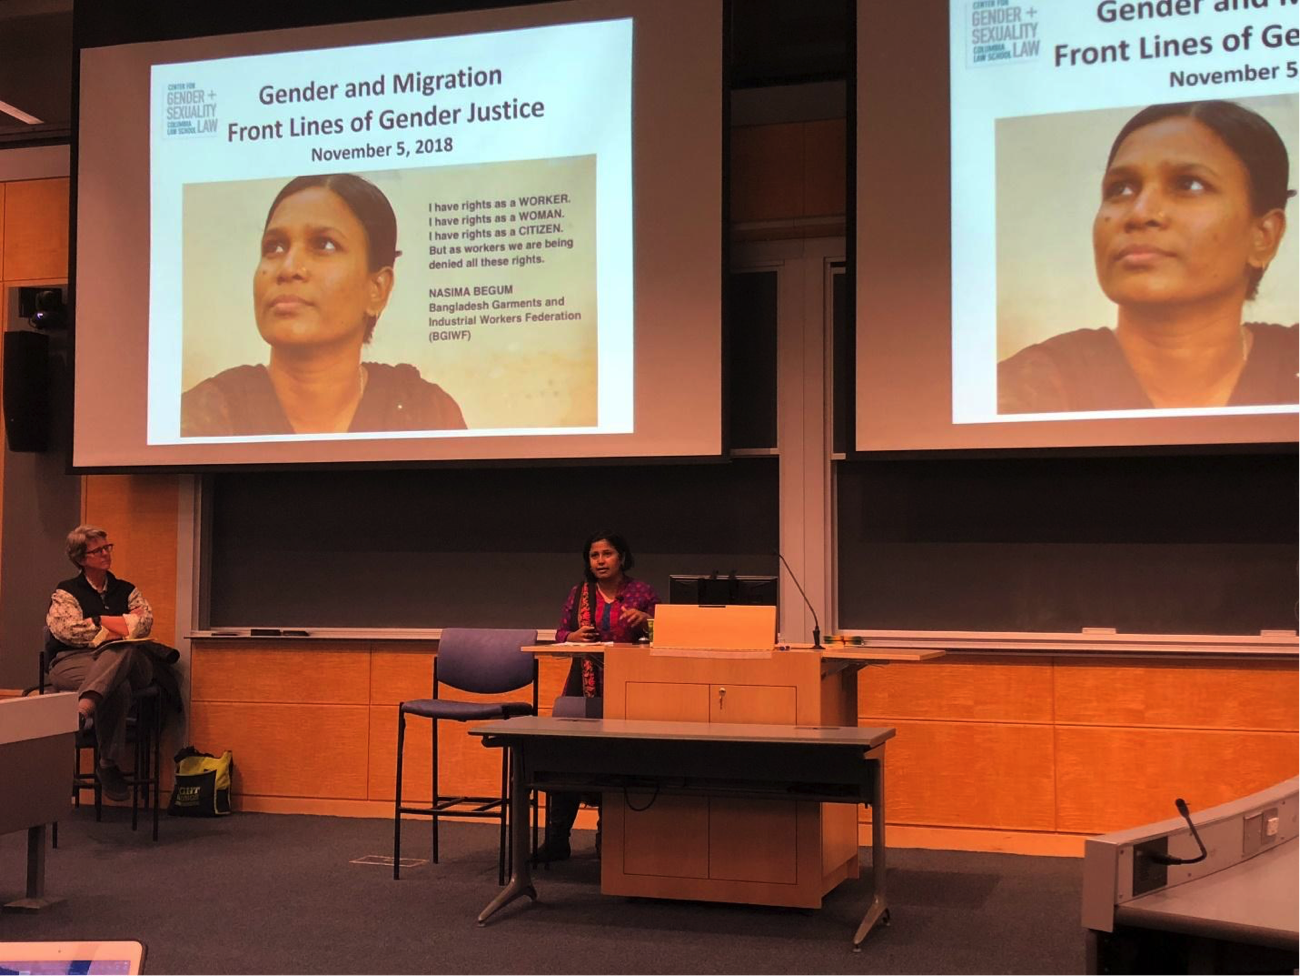 Understanding Gender, Migration, and Transnational Advocacy: A Talk with Chaumtoli Huq